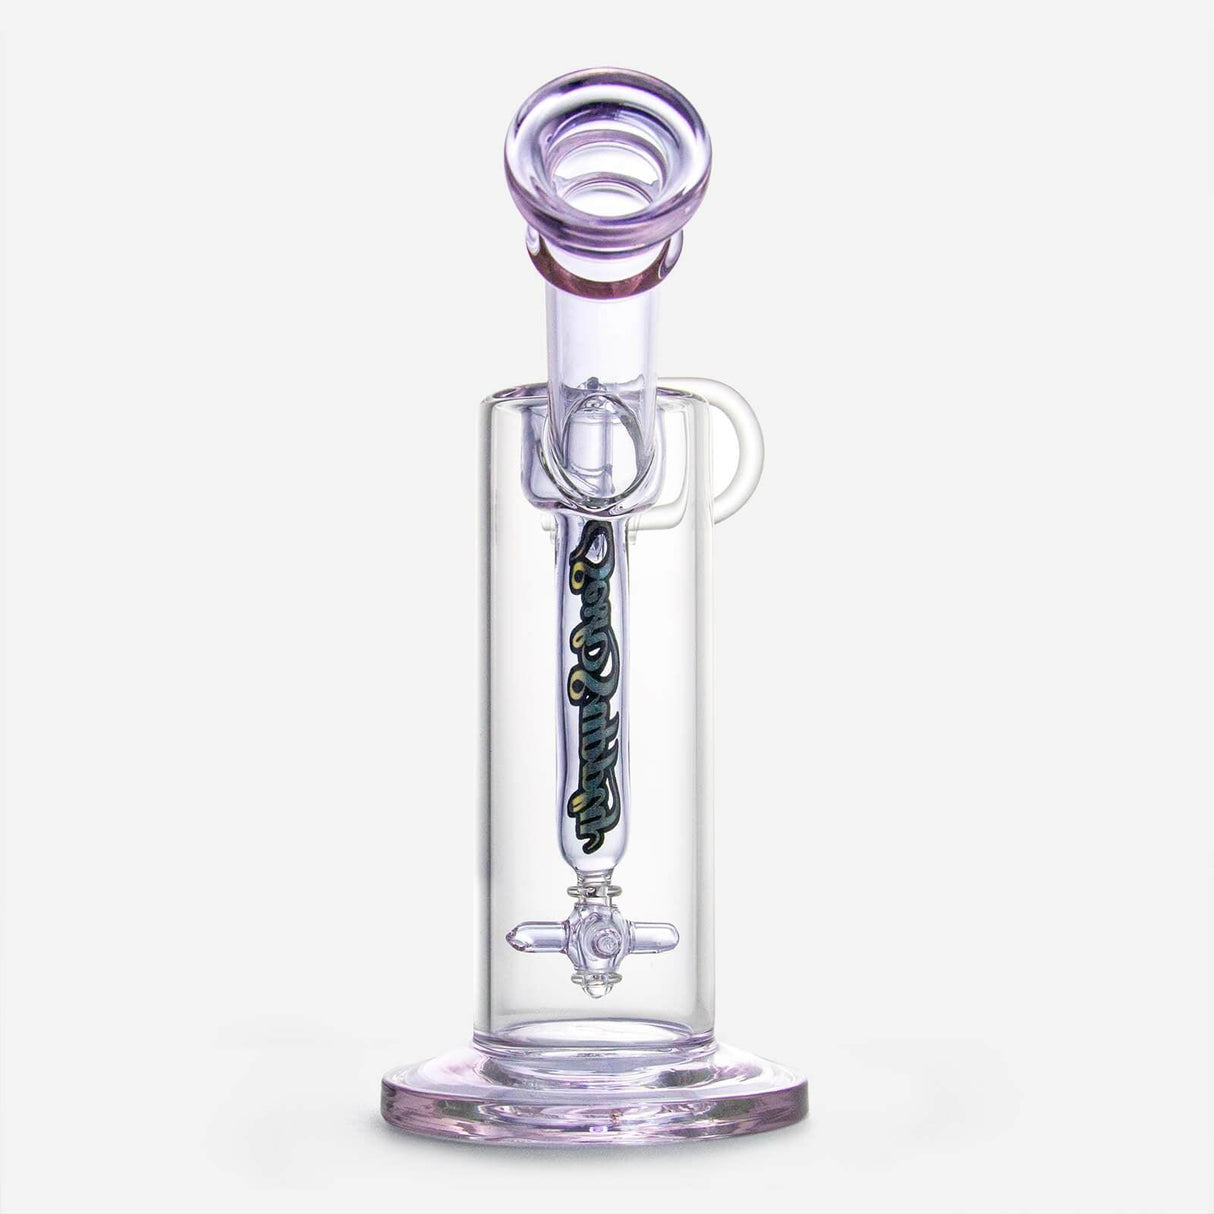 PILOT DIARY Hephaestus Swing Arm Dab Rig with Intricate Glasswork - Front View